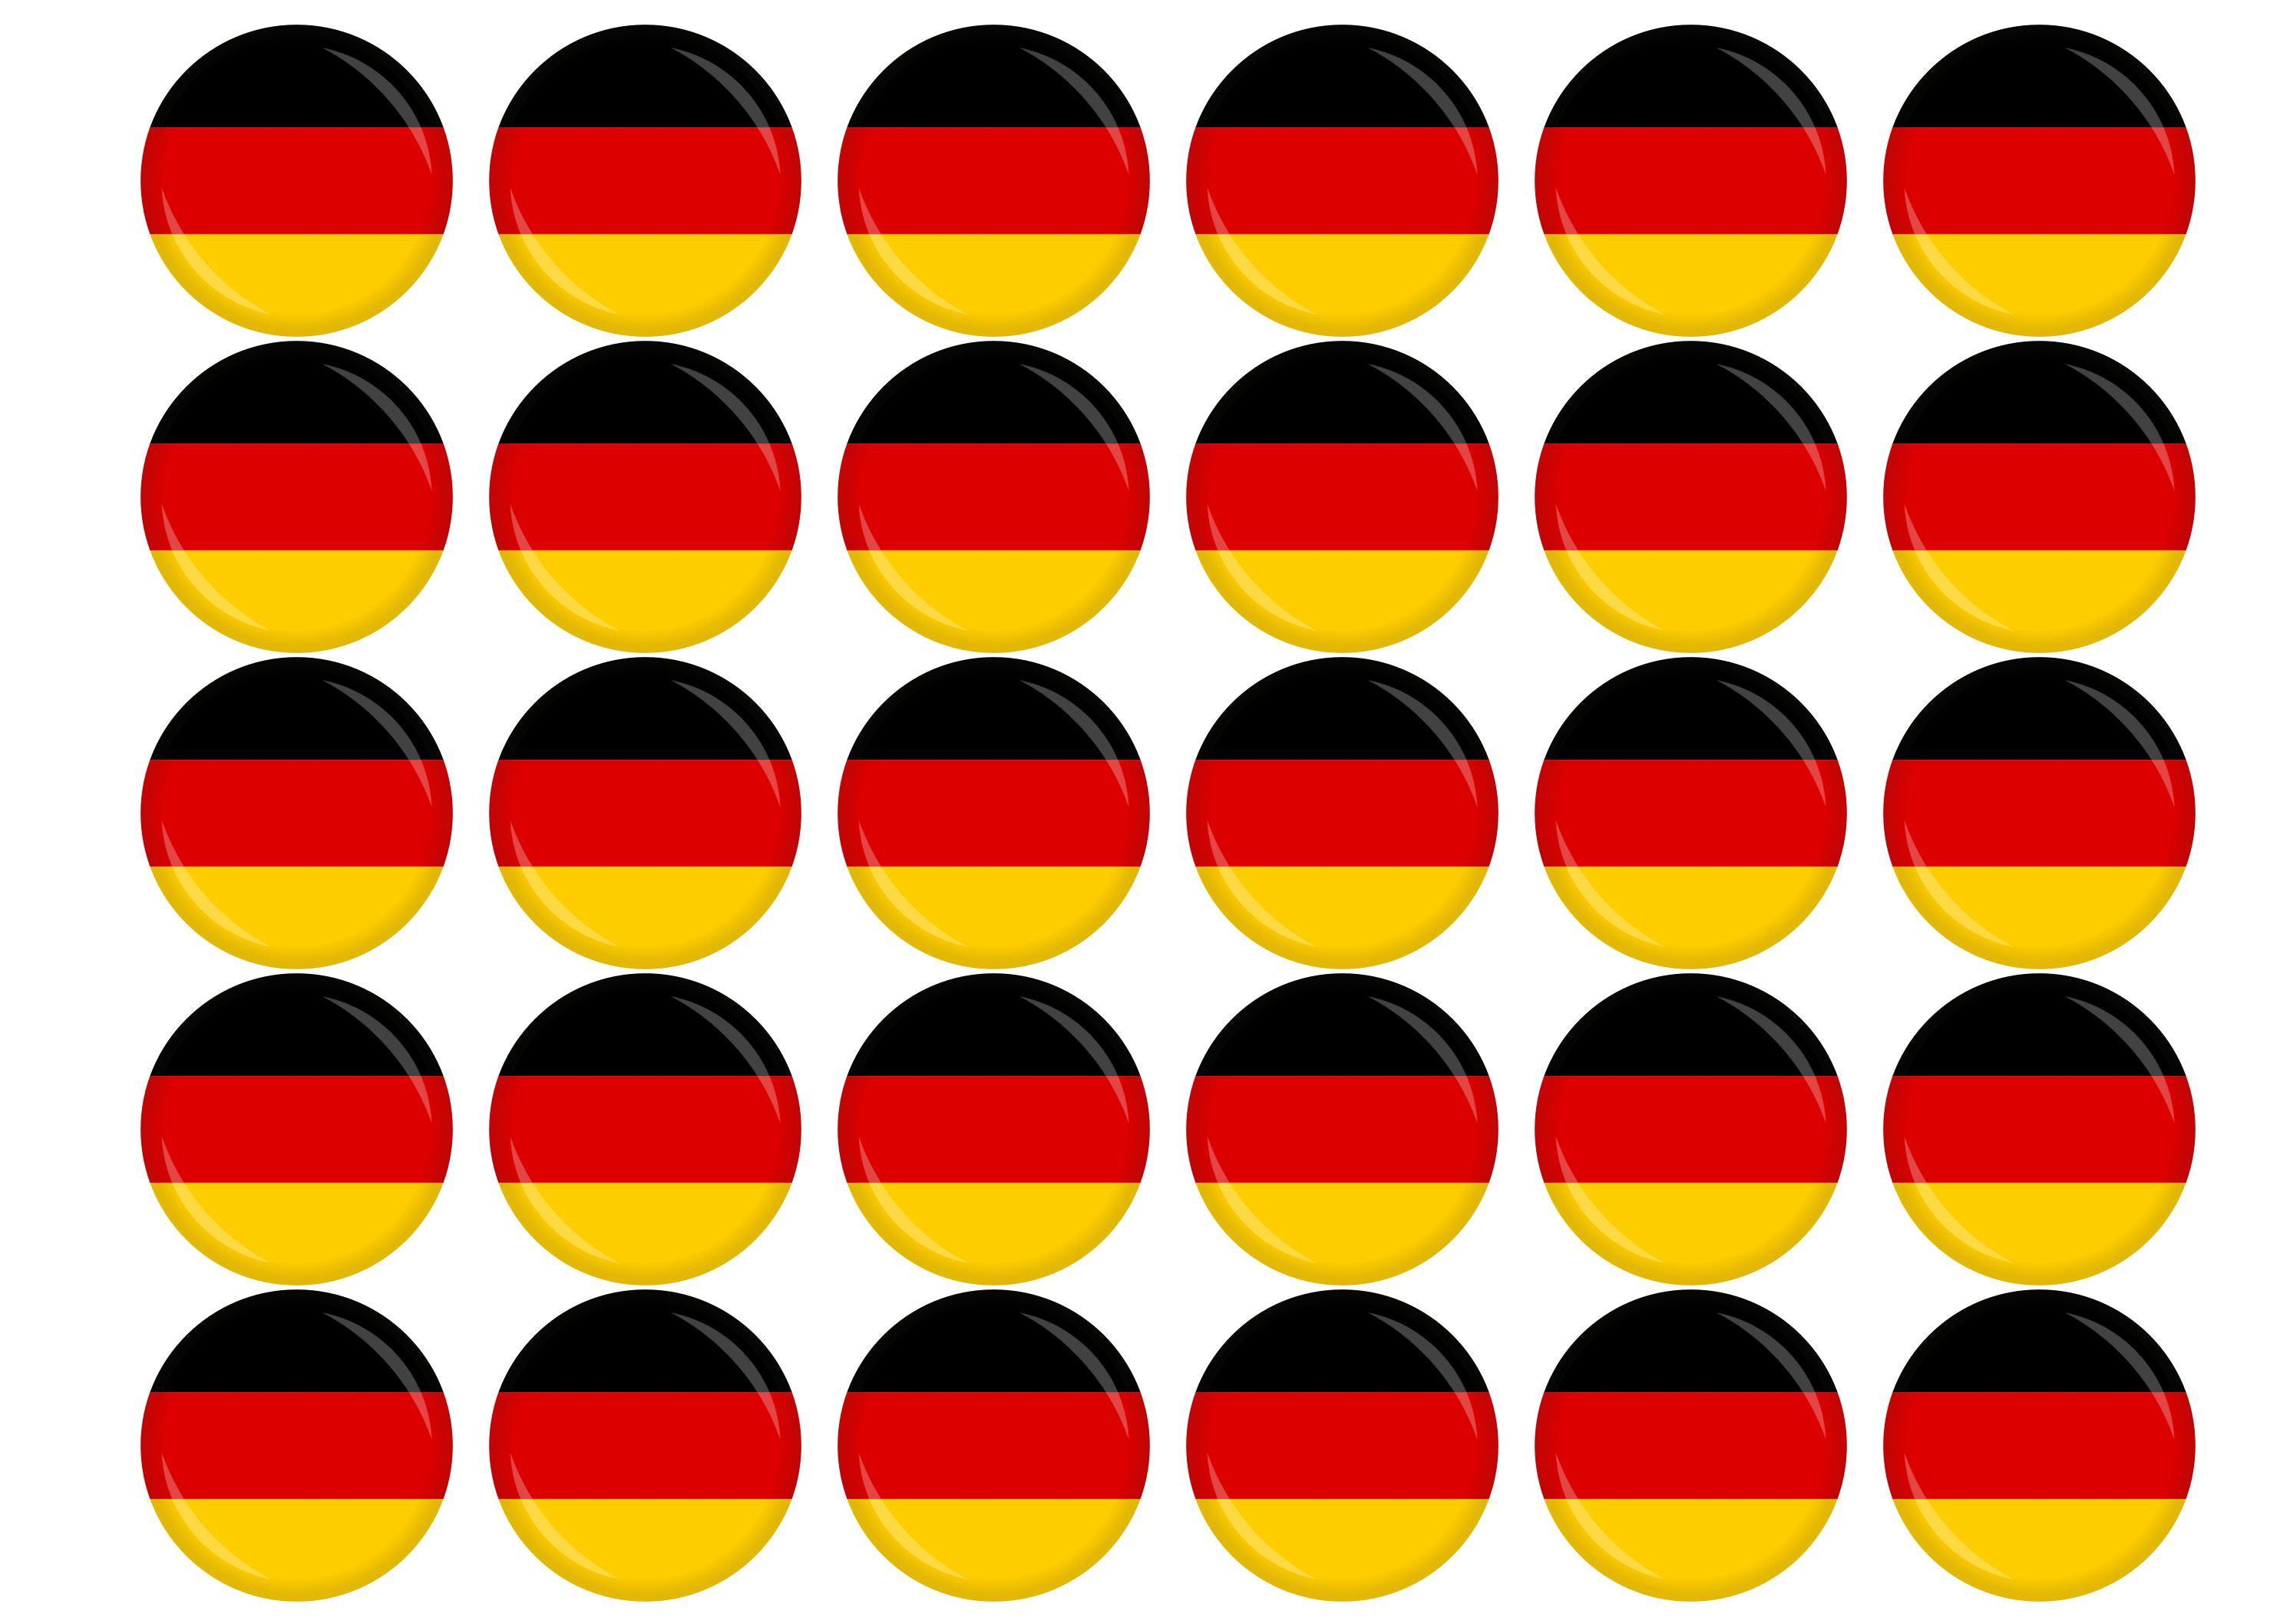 30 edible cupcake toppers with the German Flag